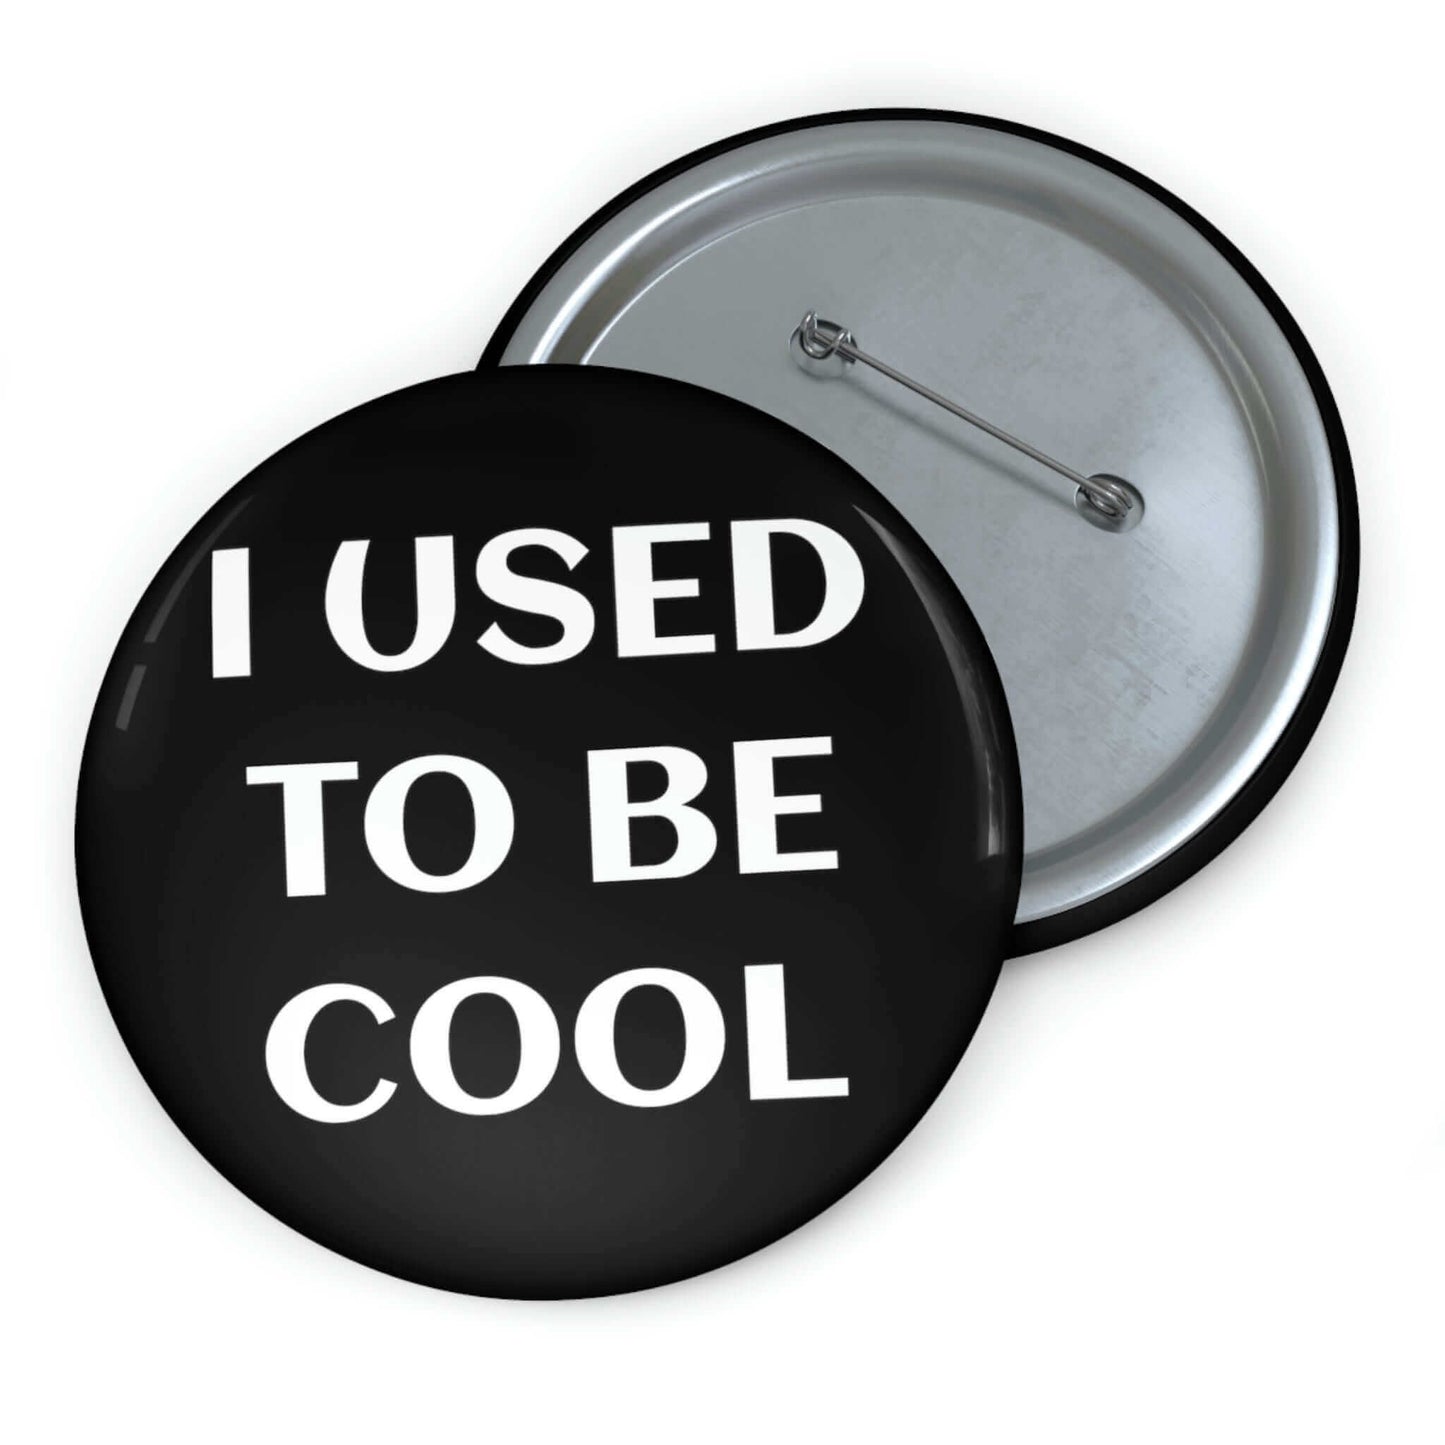 I used to be cool pin-back button.